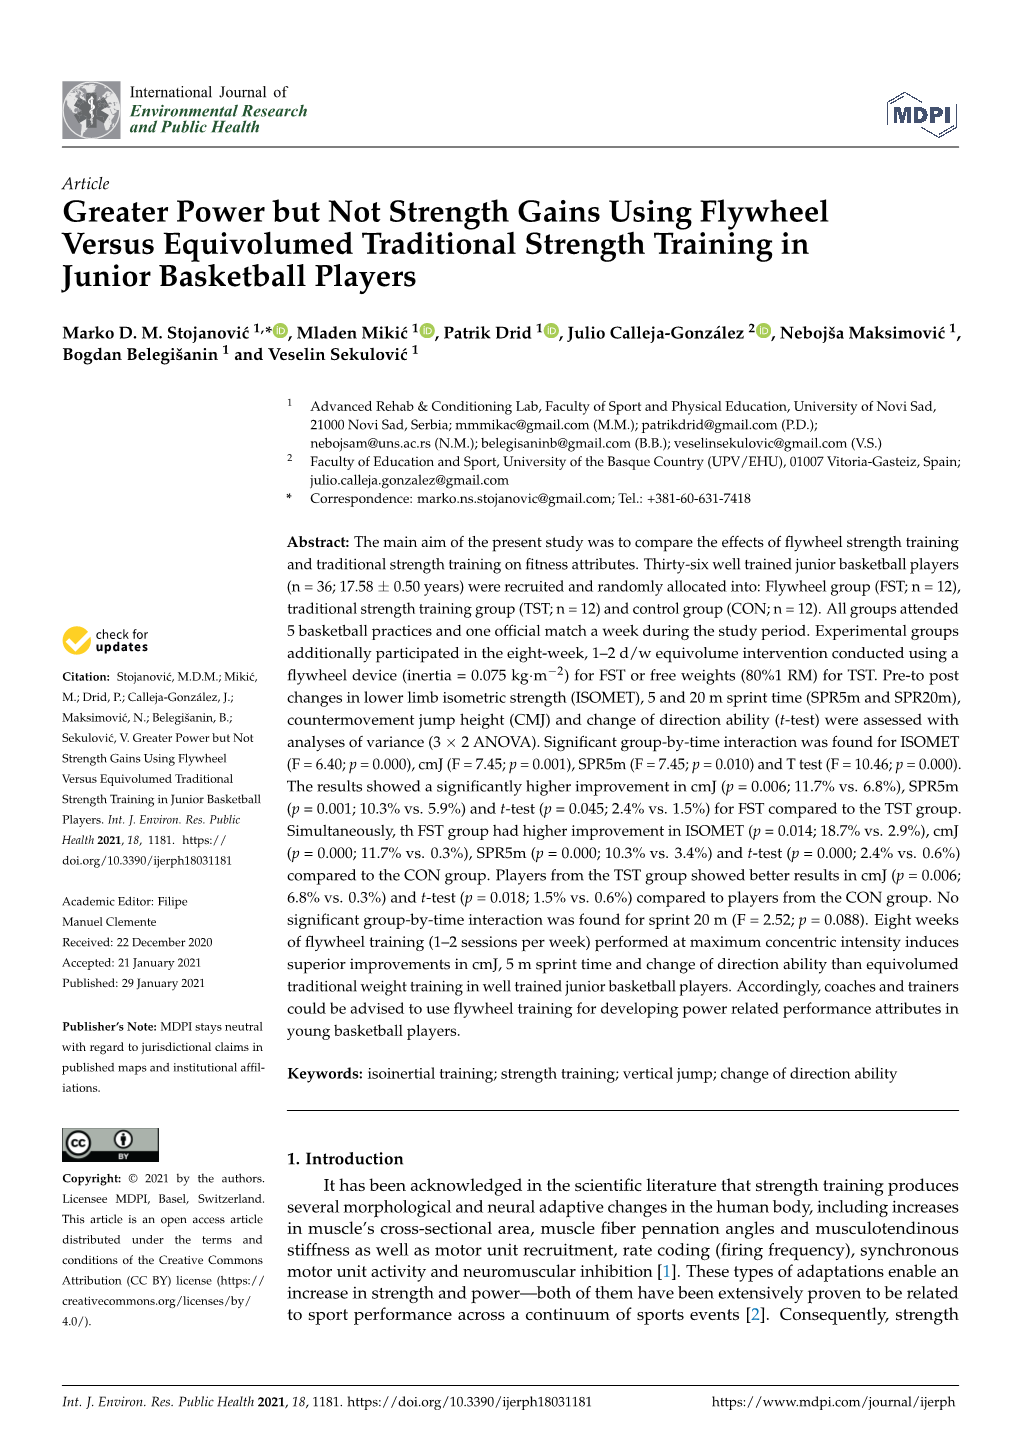 Greater Power but Not Strength Gains Using Flywheel Versus Equivolumed Traditional Strength Training in Junior Basketball Players